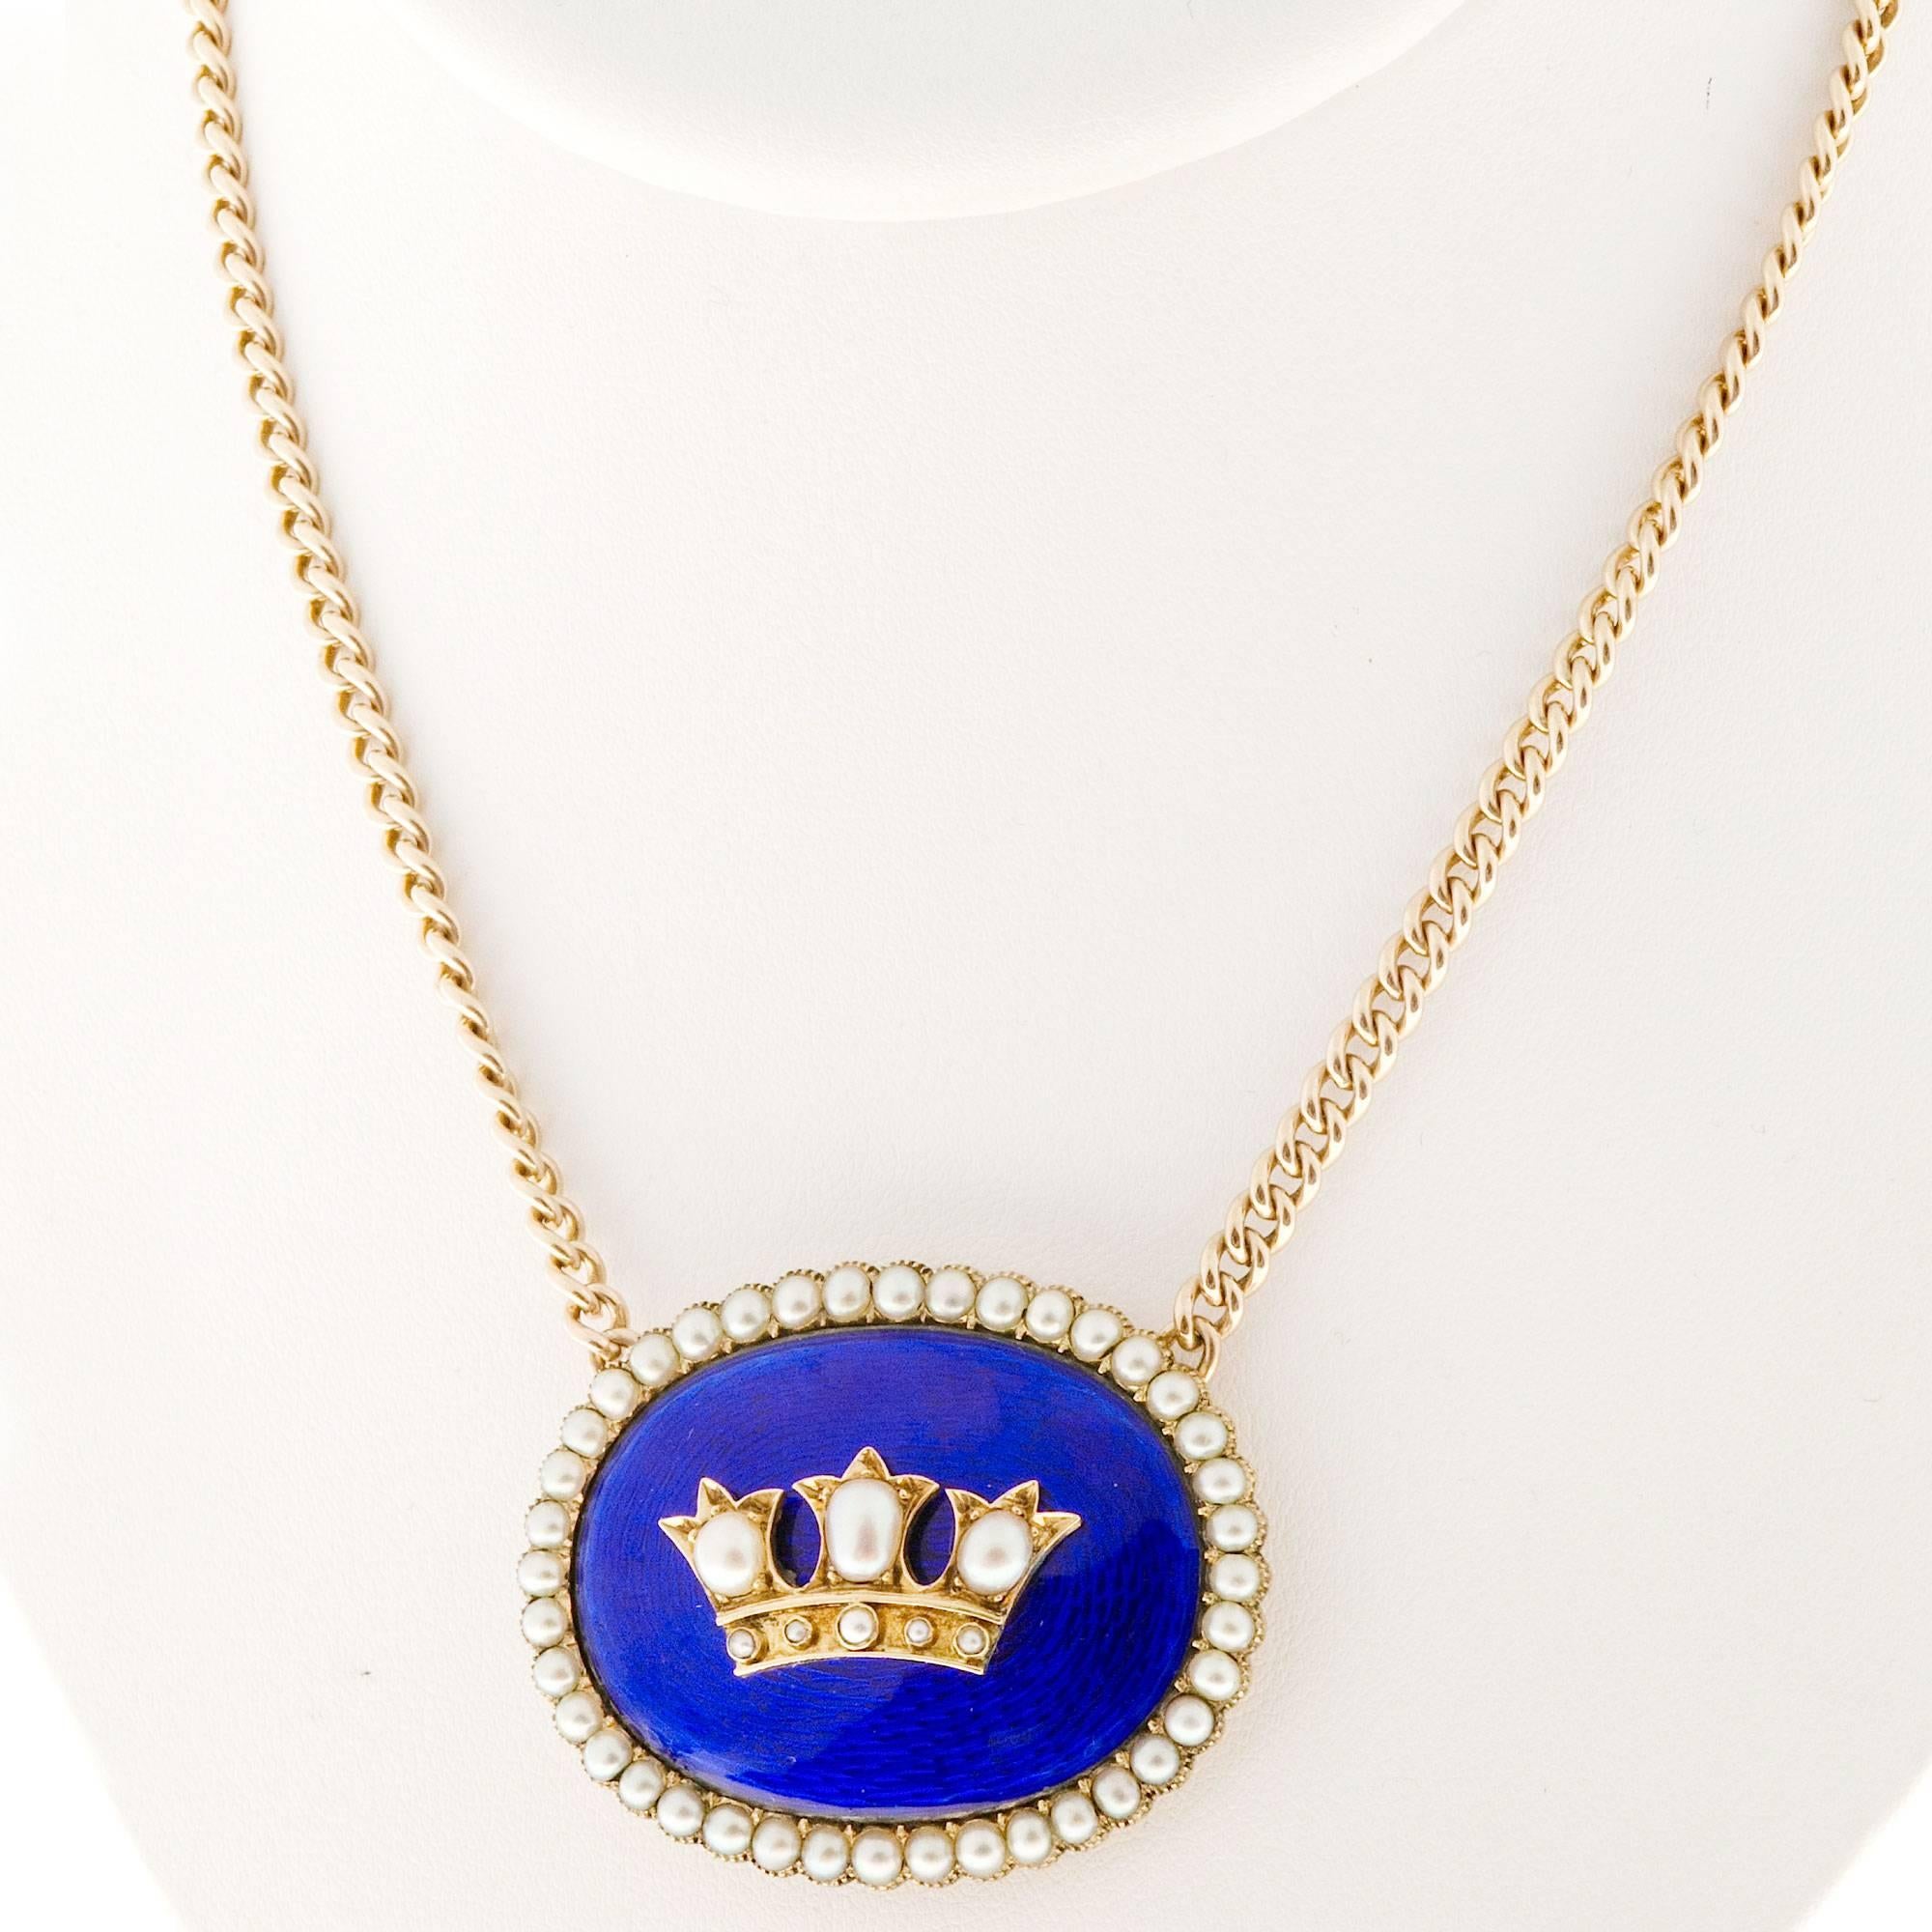 Cobalt Blue Enamel Natural Pearl Gold Pendant Necklace In Good Condition For Sale In Stamford, CT